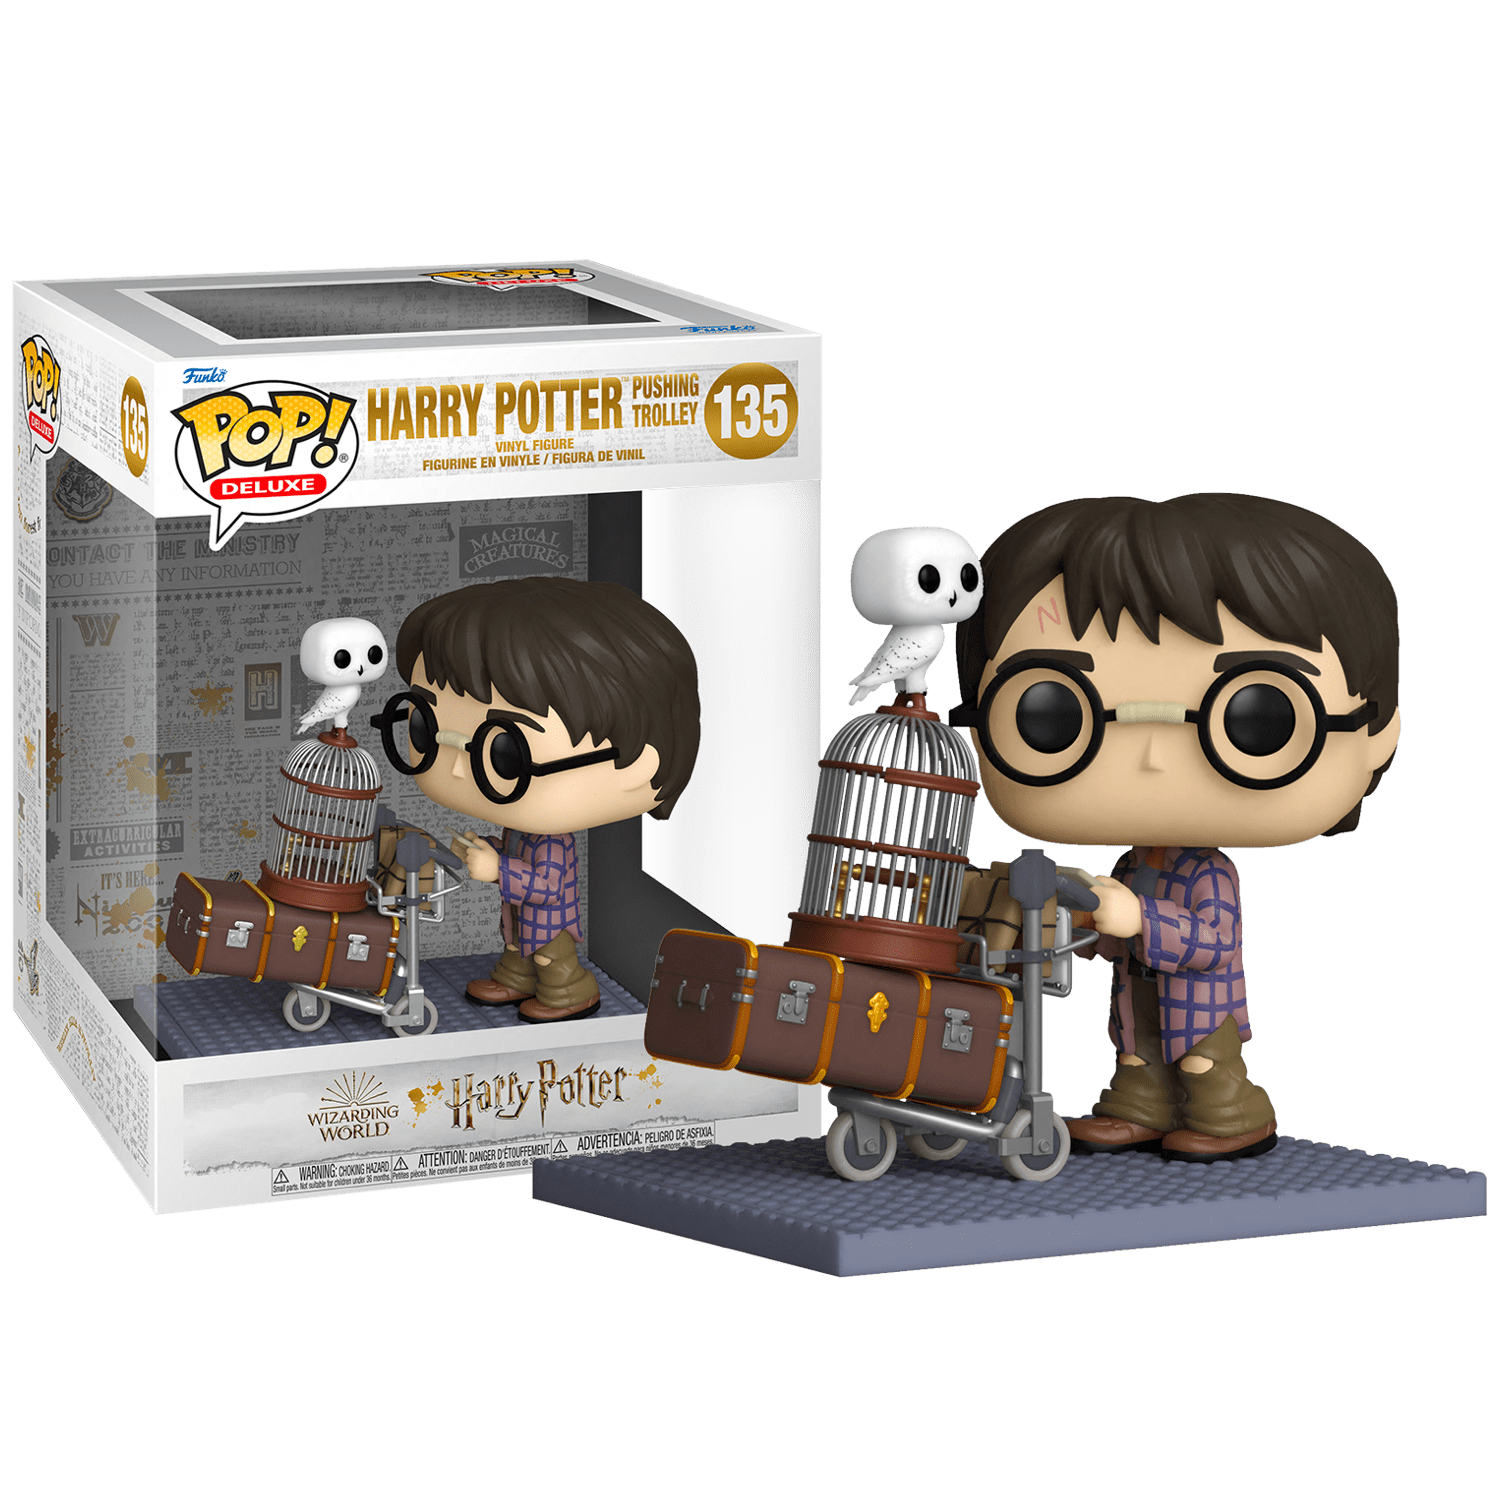 https://static.insales-cdn.com/images/products/1/608/506651232/funko-pop-russia-Harry-Potter-Pushing-Trolley-20th-Anniversary-Deluxe-Harry-Potter-135-FU57360.png